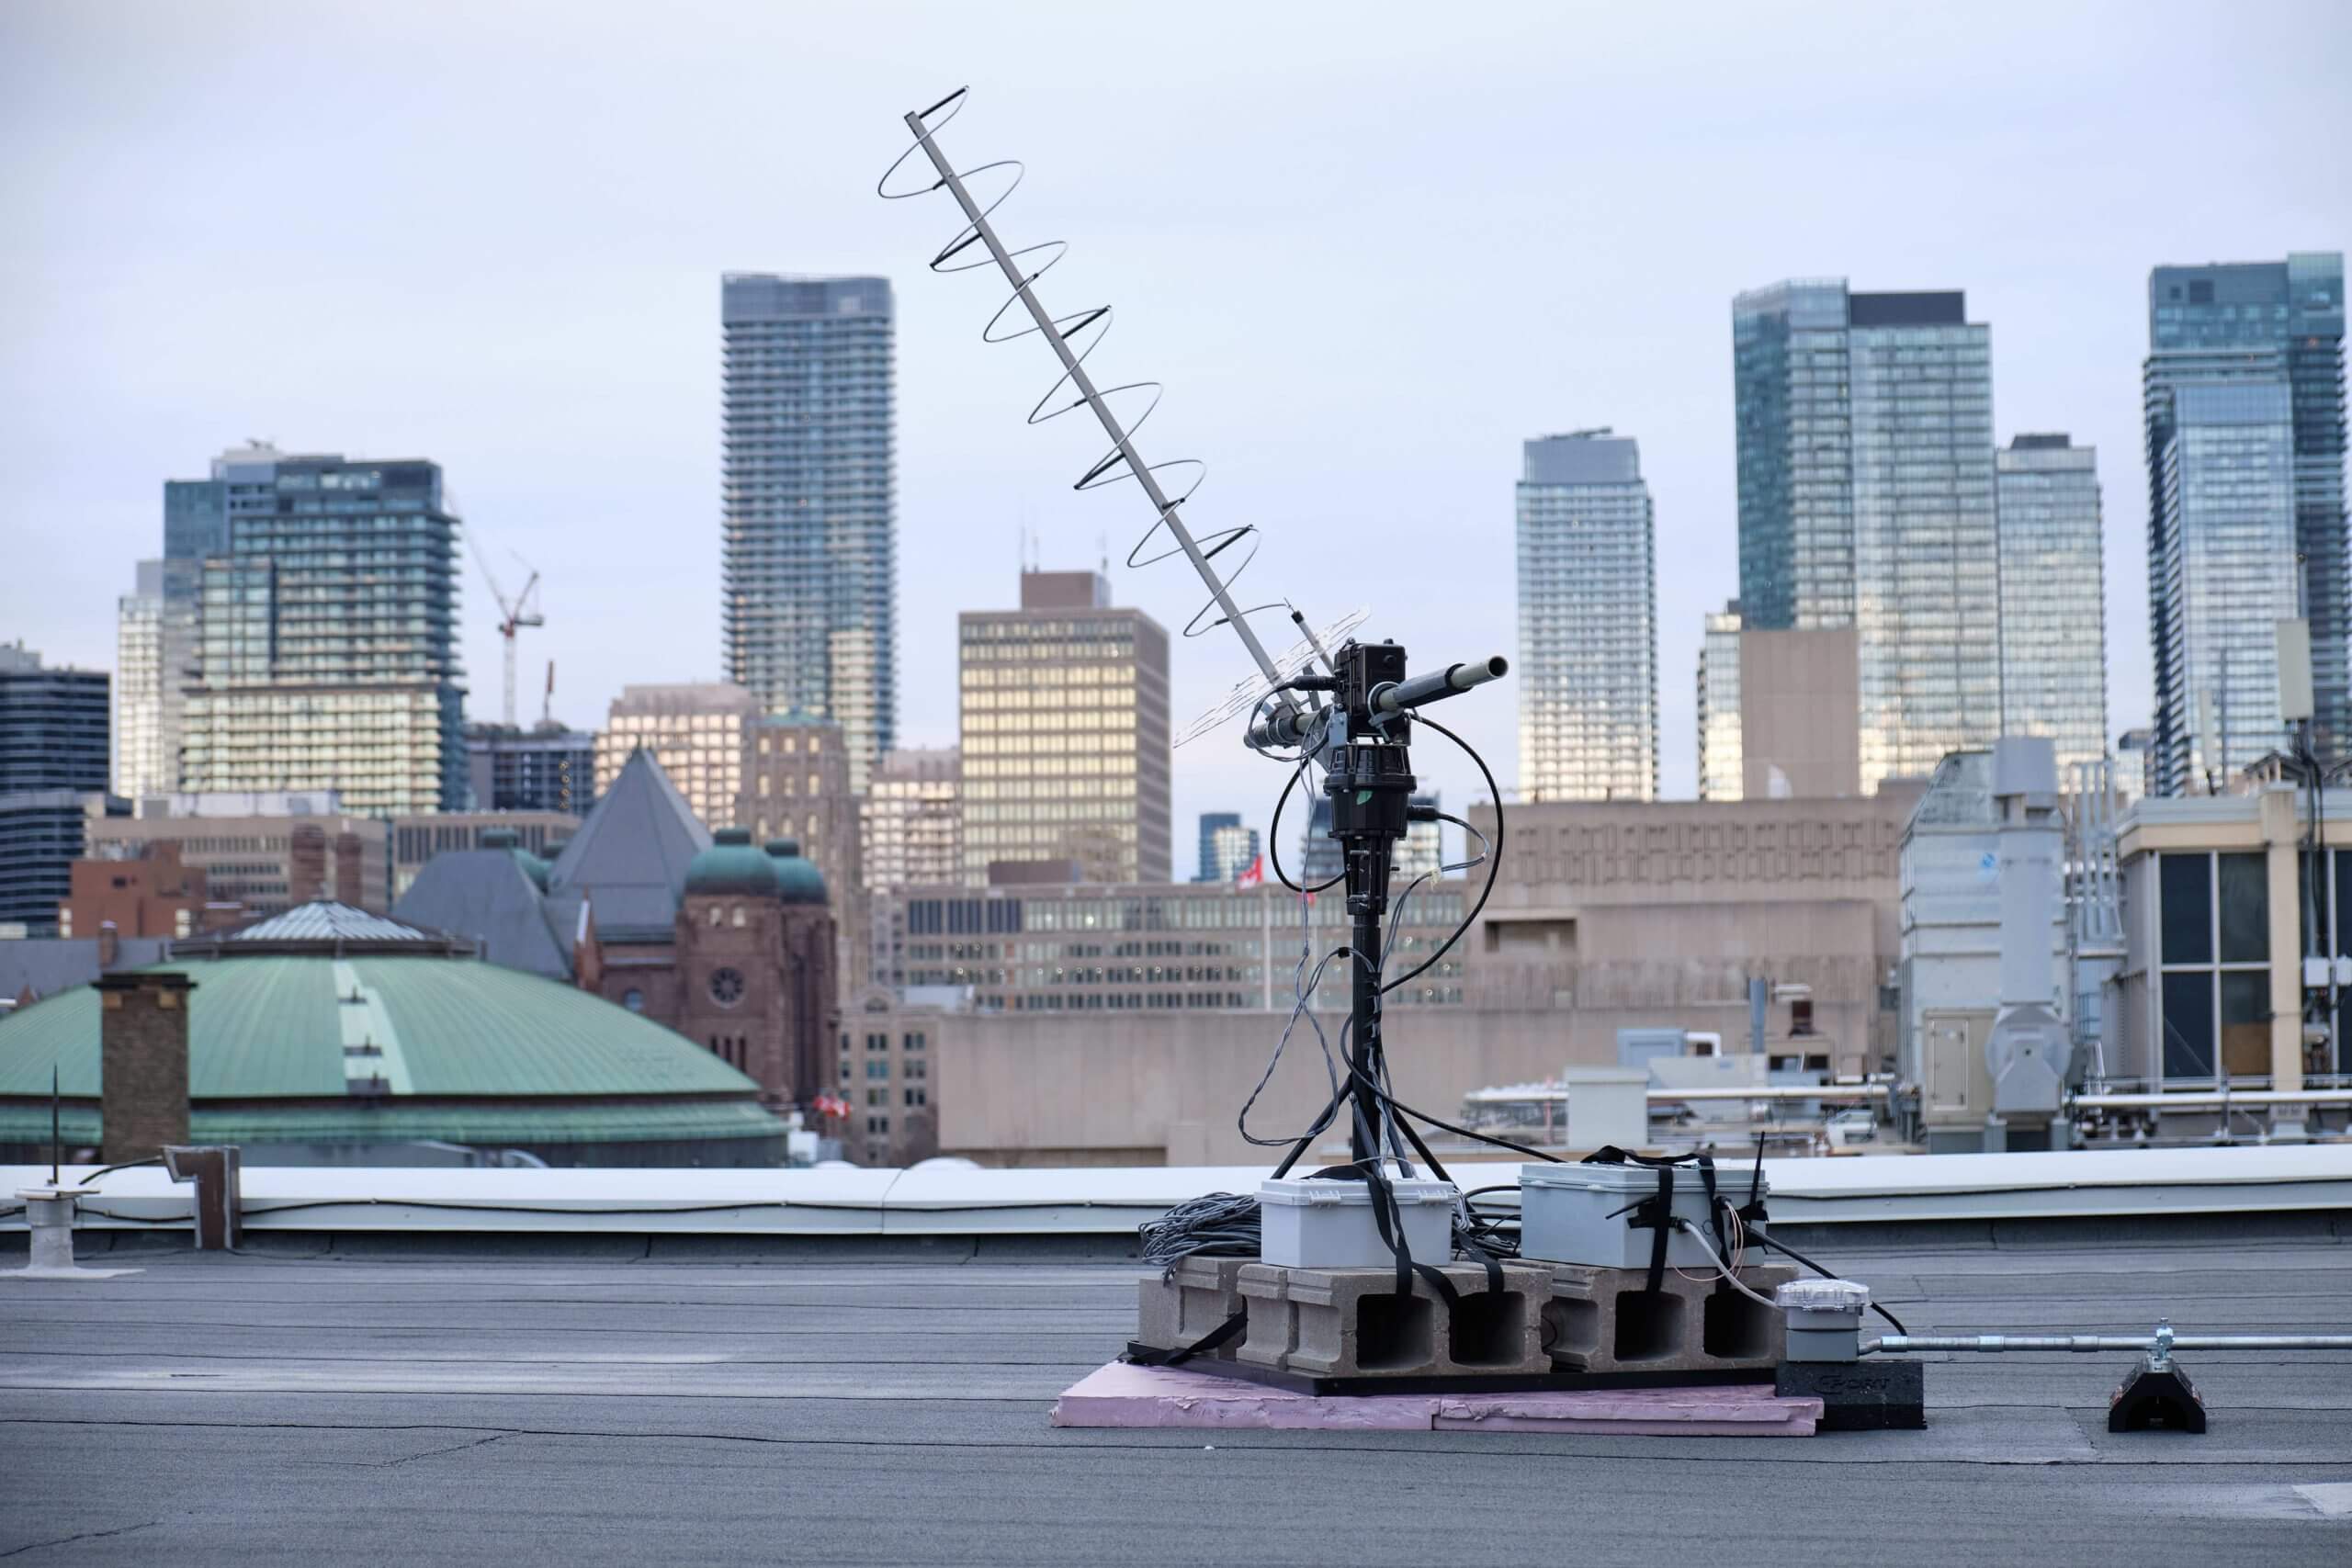 Equipment on roof with skyline in background